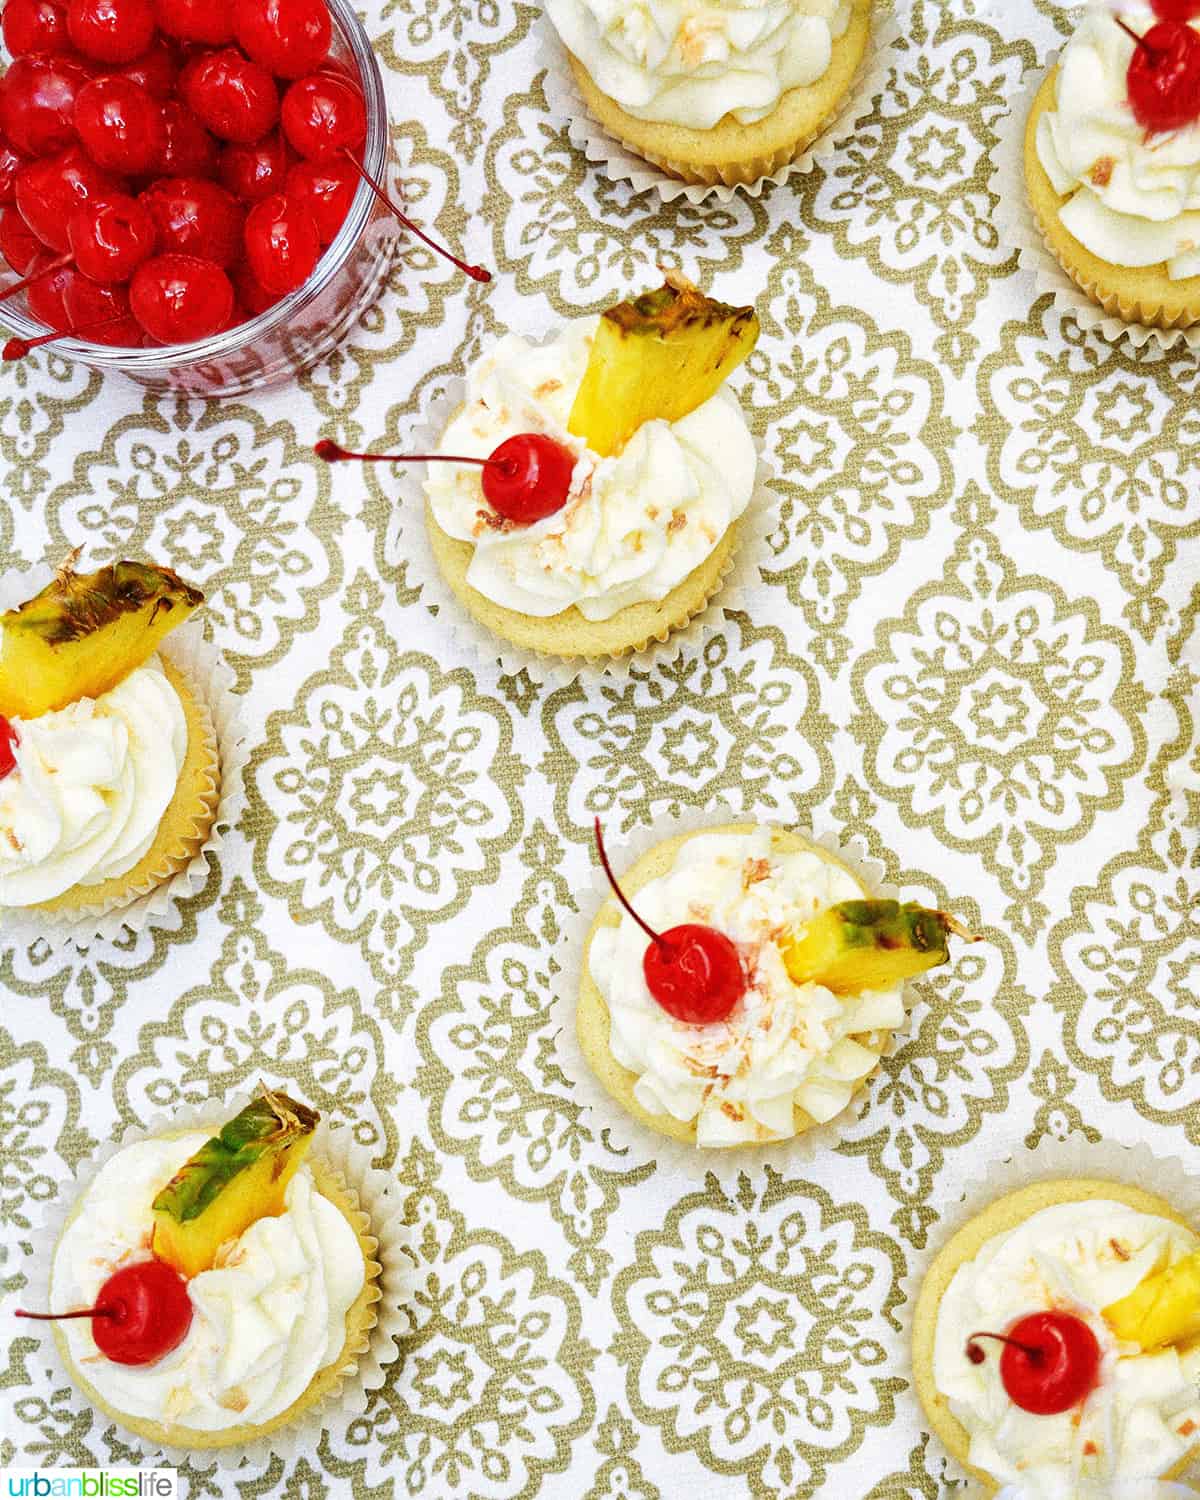 pina colada cupcakes on a patterned table with bowl of maraschino cherries.